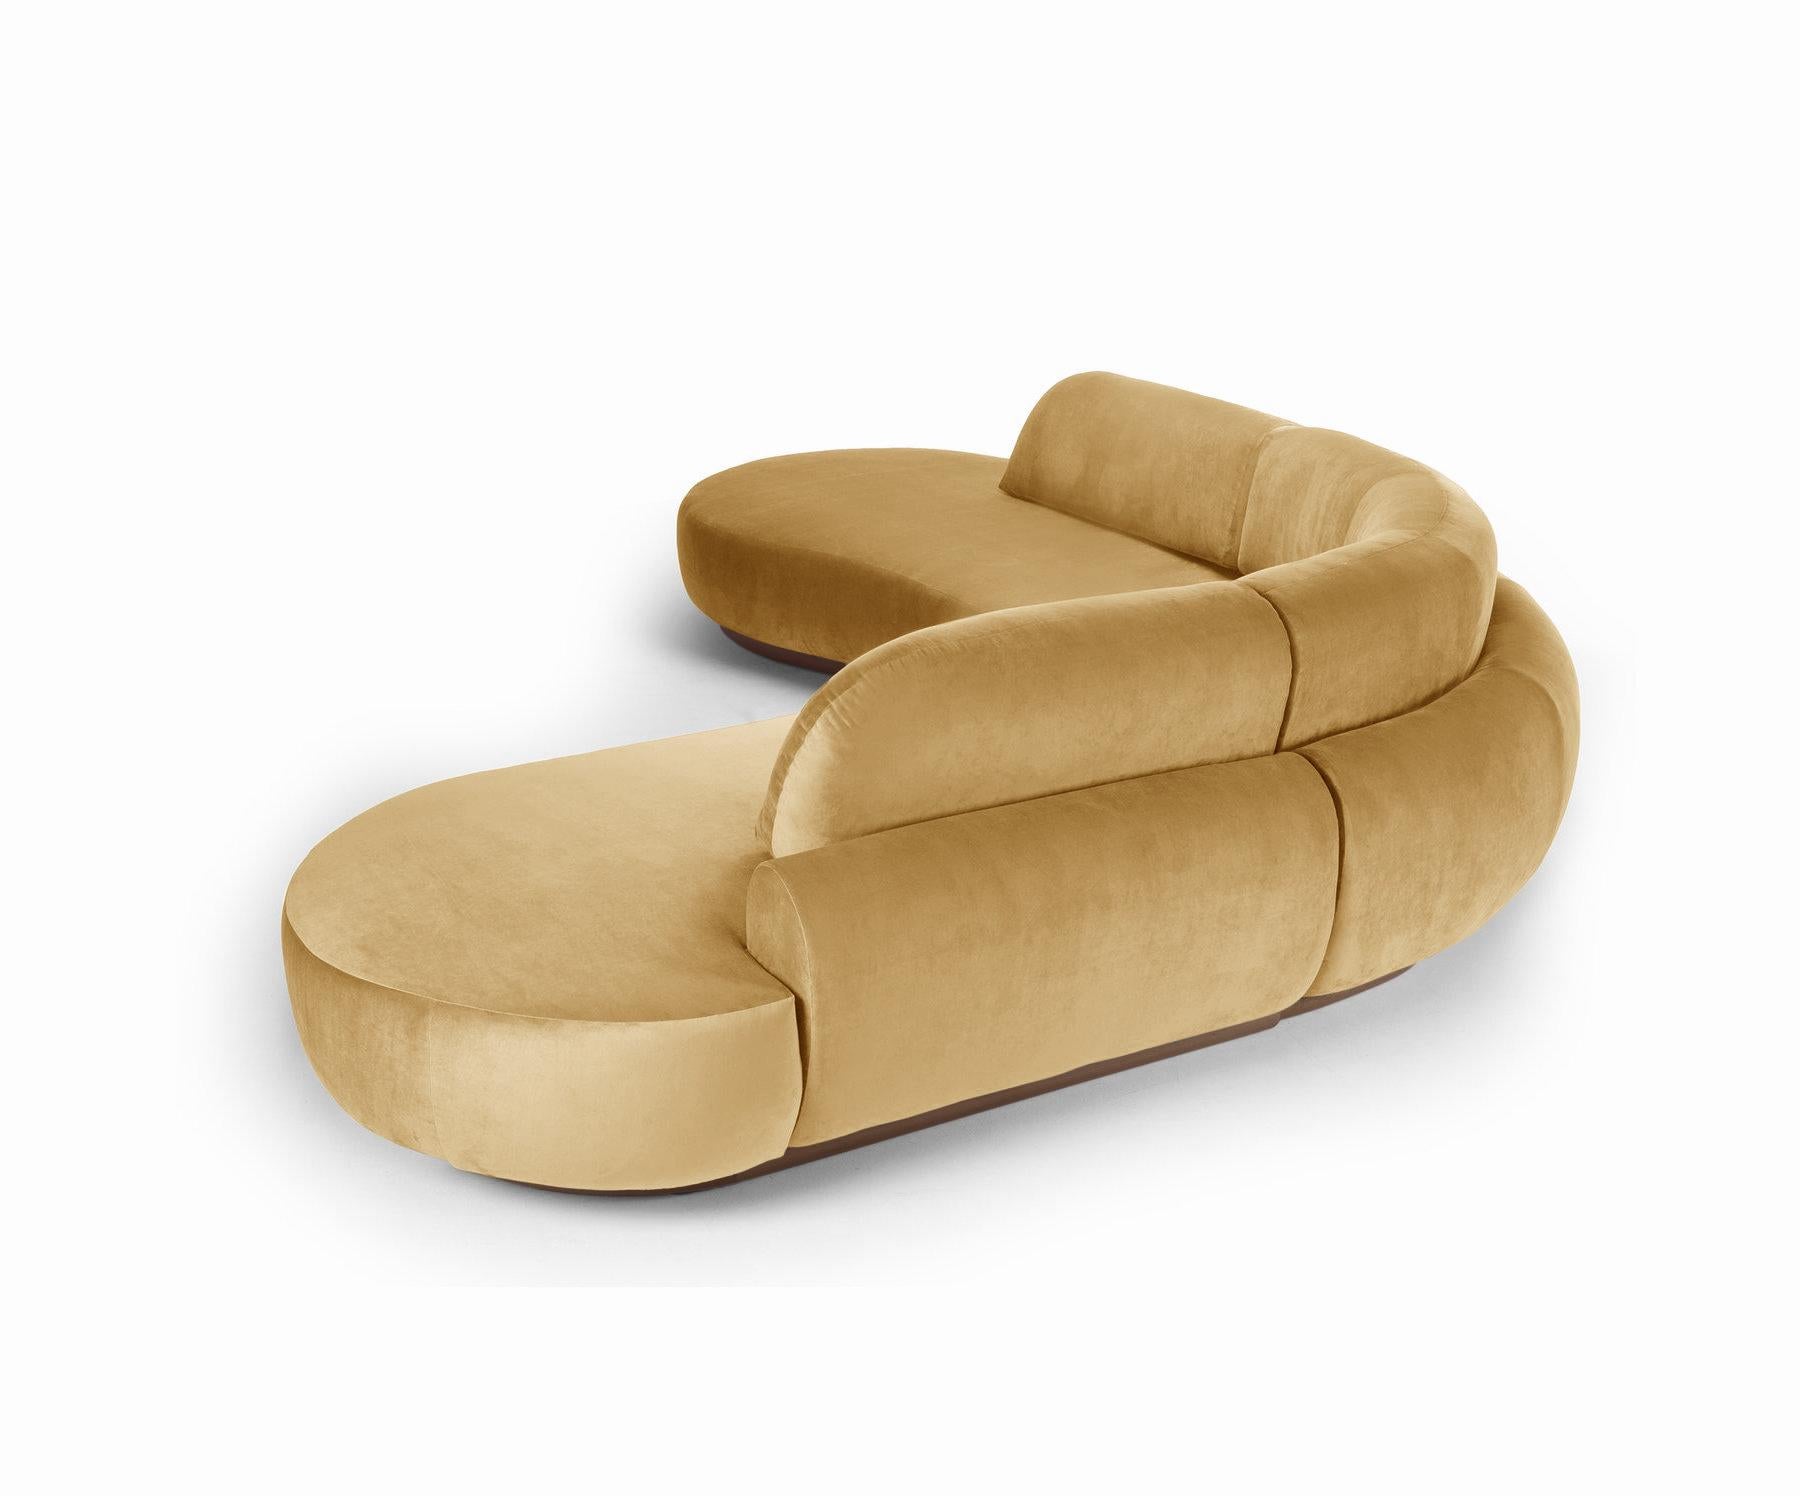 Portuguese Naked Curved Sectional Sofa, 3 Piece with Beech Ash-056-1 and Vigo Plantain For Sale